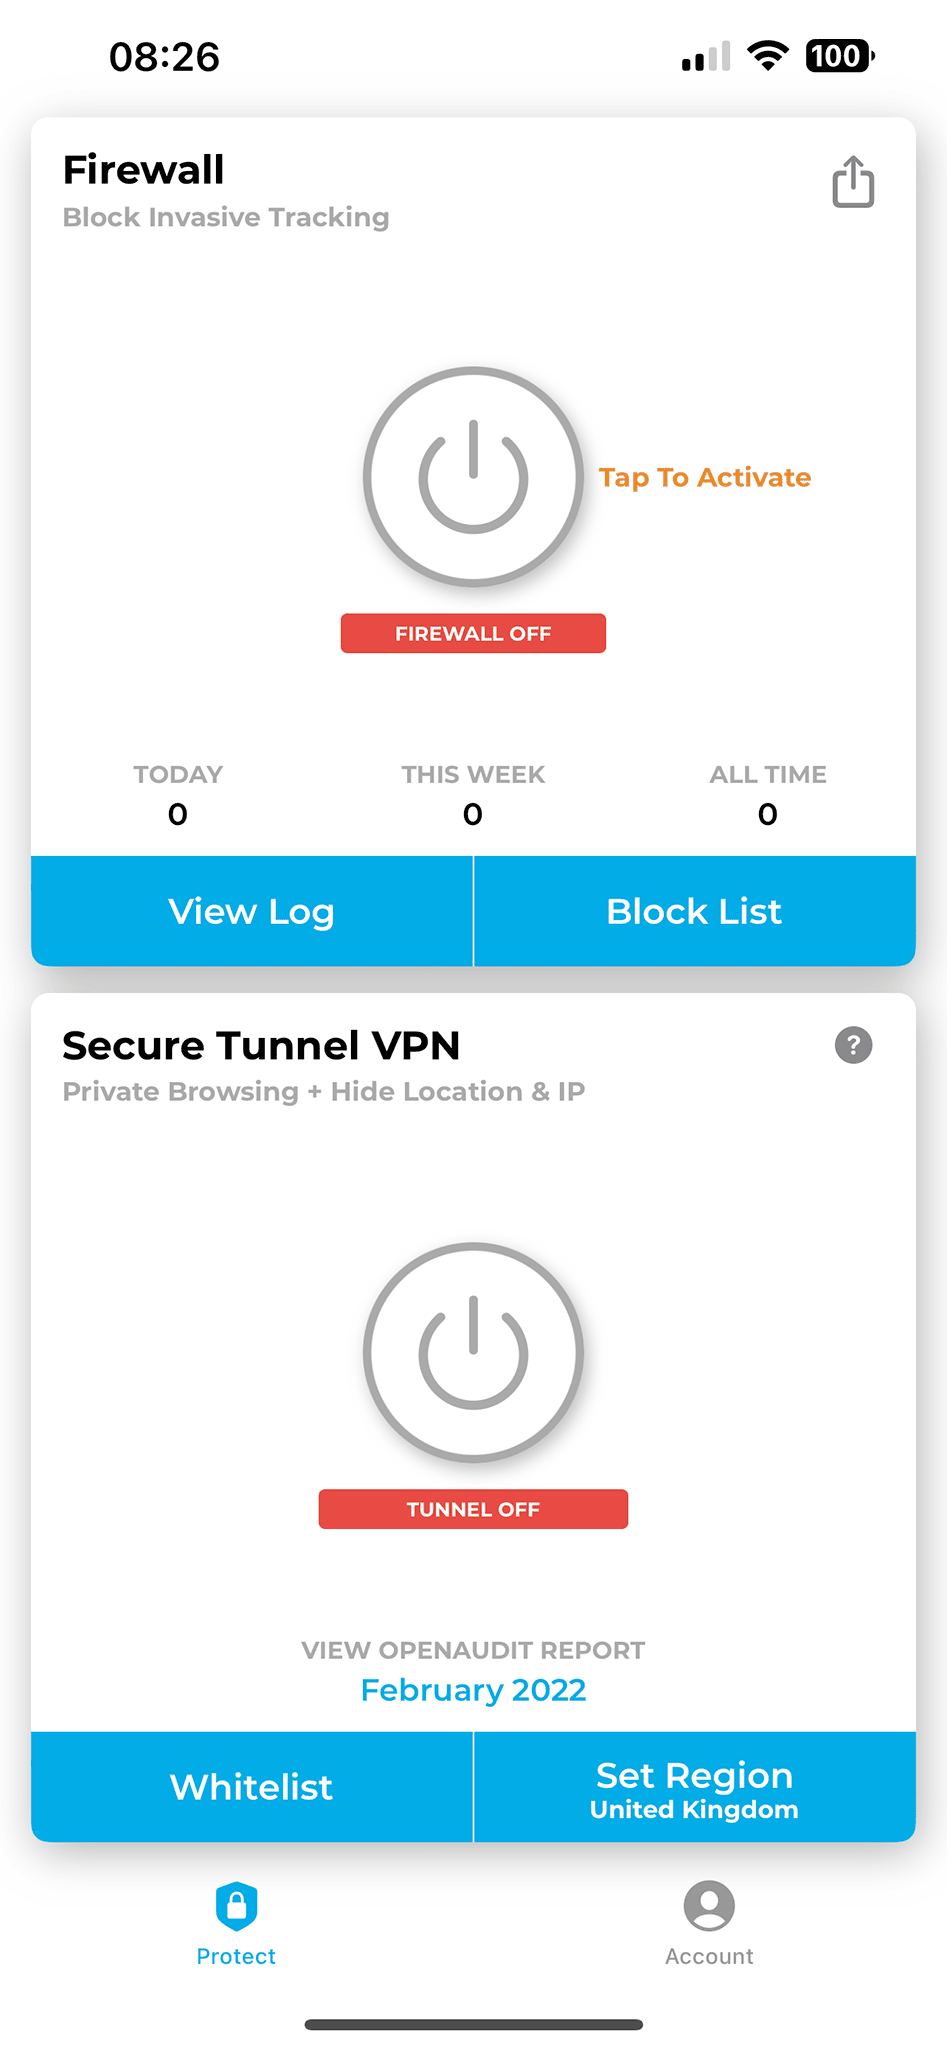 Lockdown Privacy - the main window of the application with two basic functions - Firewall and Secure Tunnel VPN